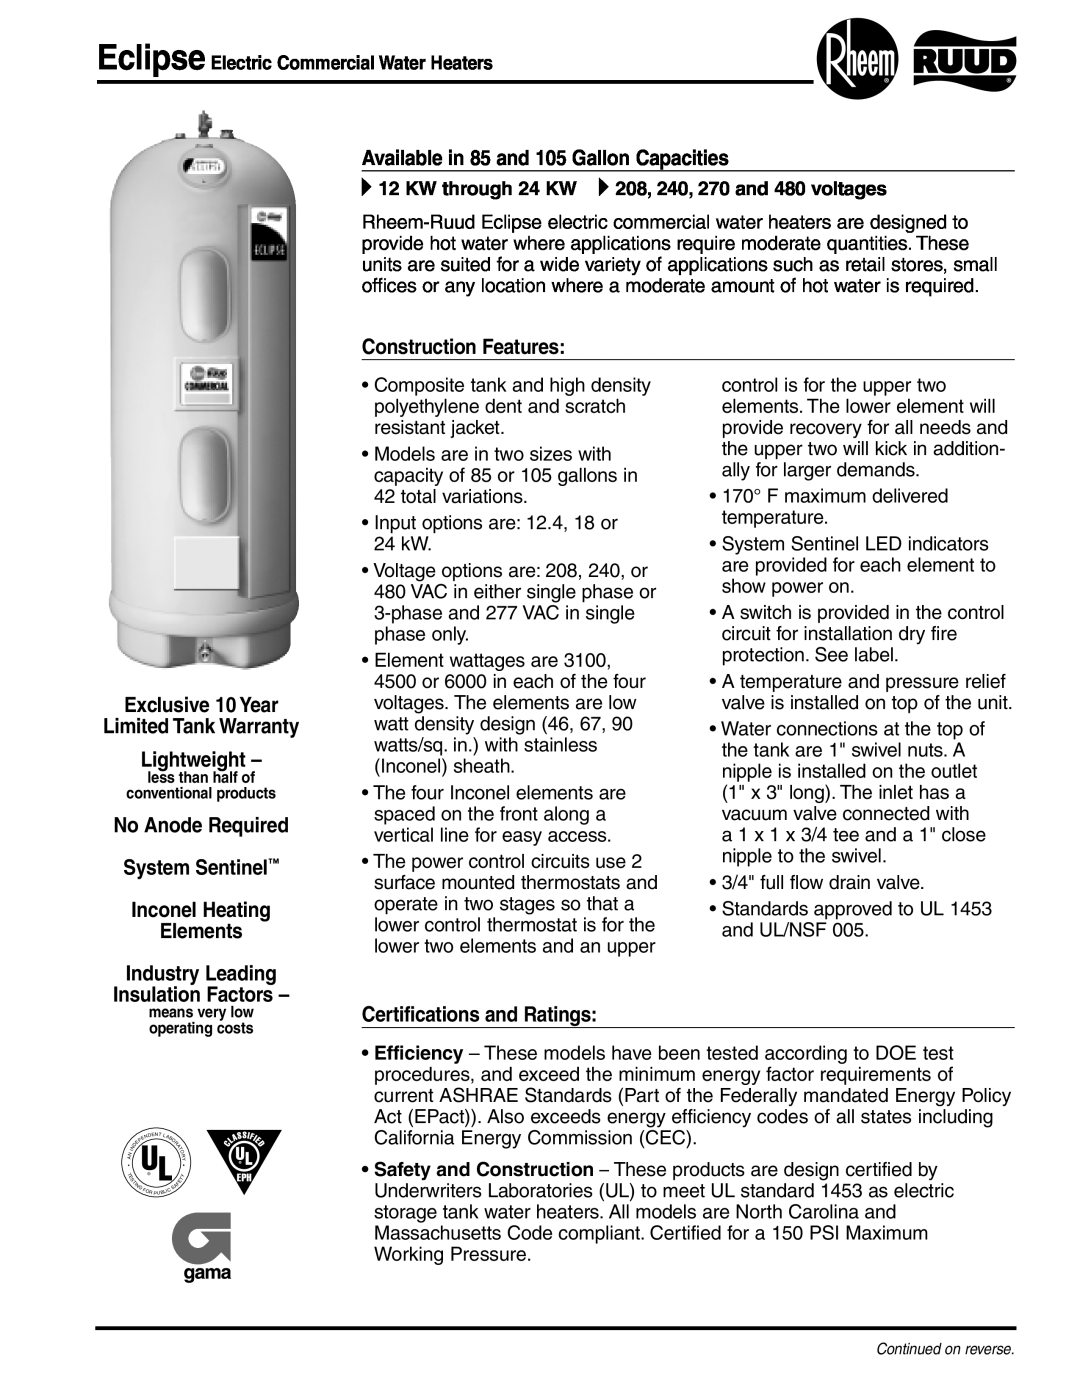 Rheem Electric Commercial Water Heater warranty Available in 85 and 105 Gallon Capacities, Construction Features 